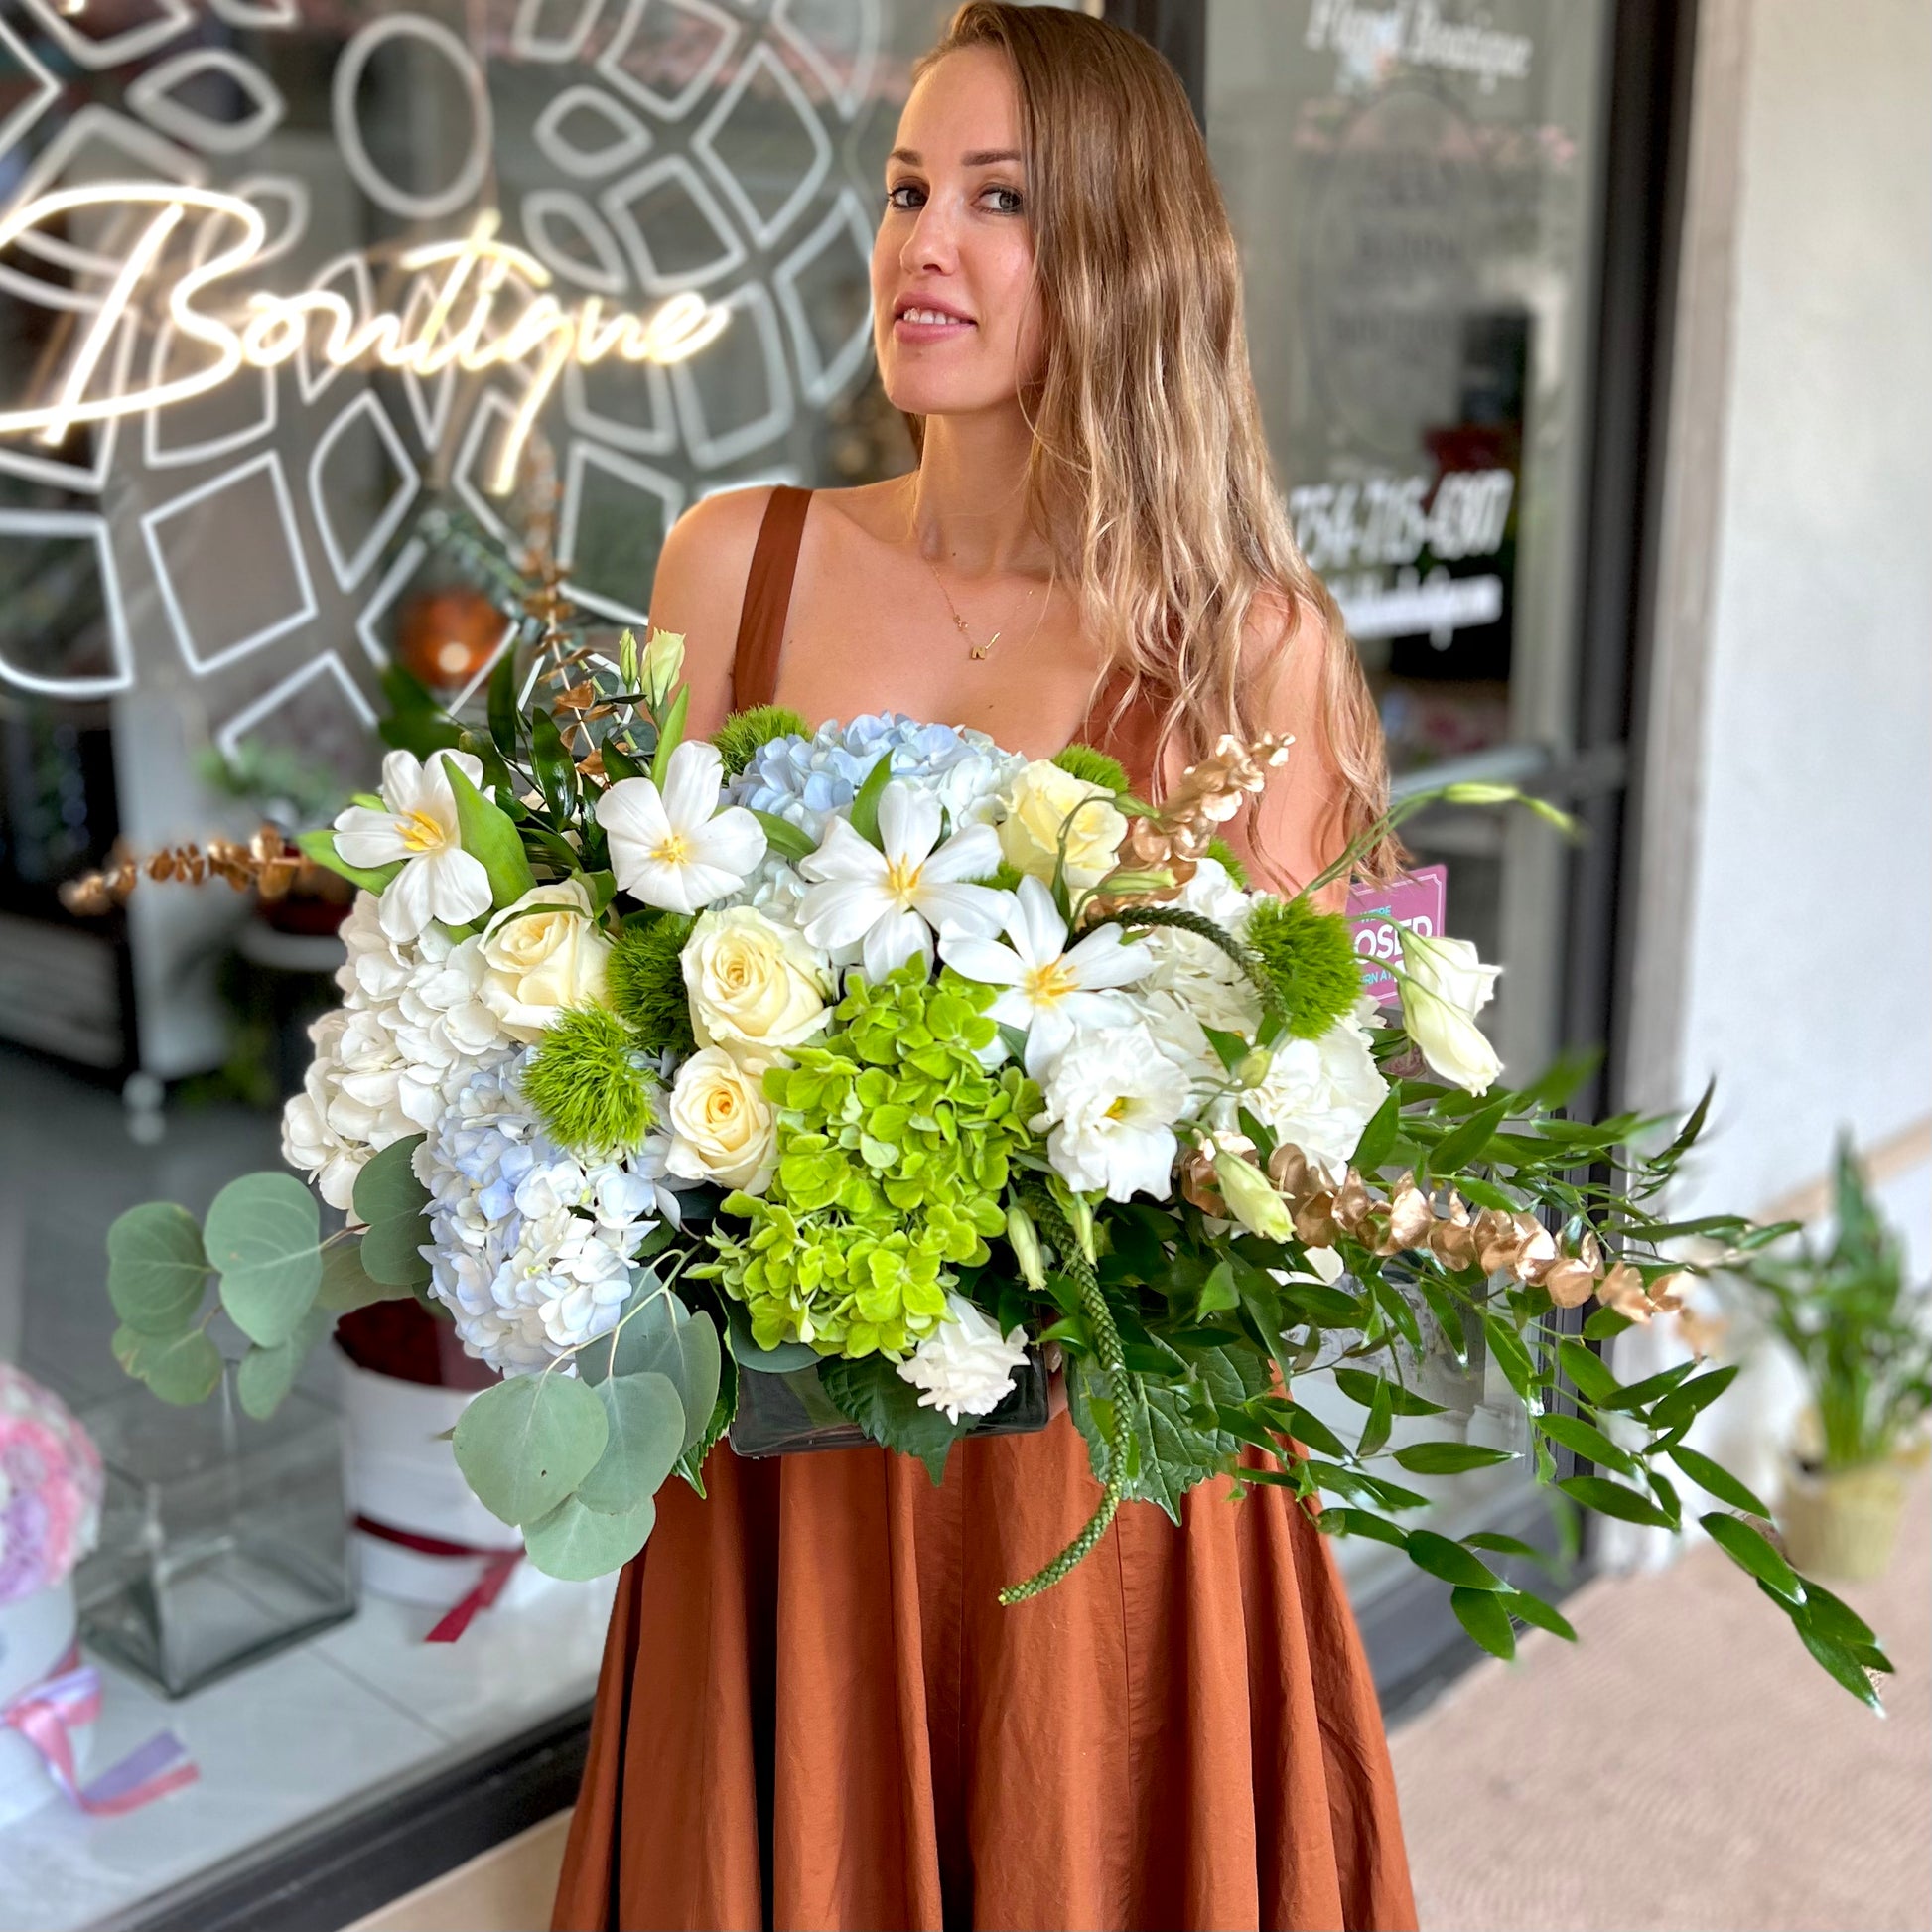 Long hair women in store front holding colorful tulips bouquet with blue hydrangea